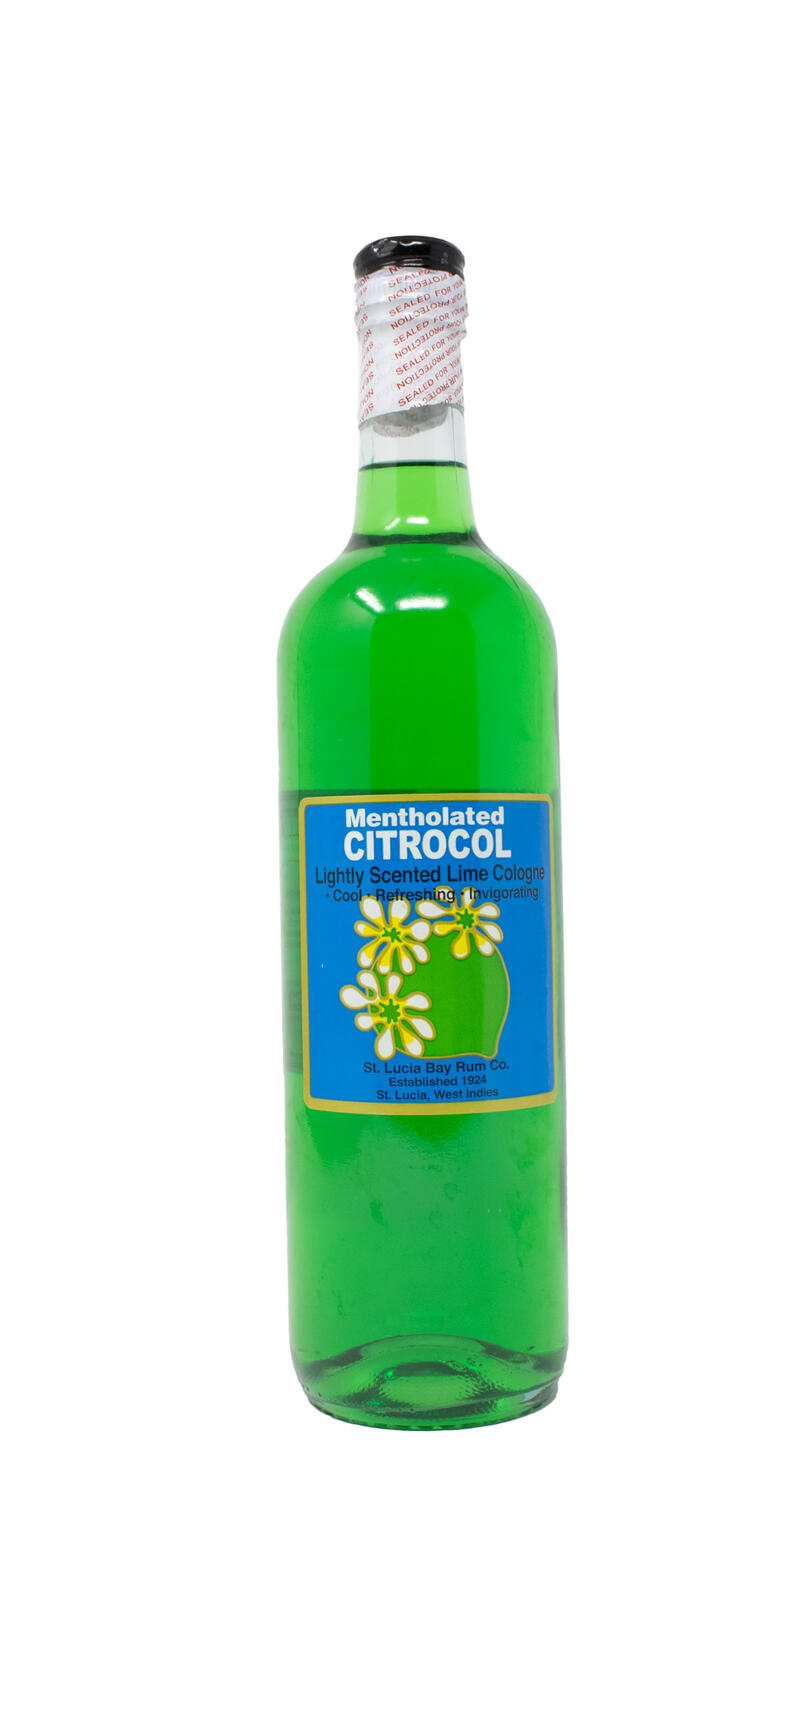 Citrocol Mentholated 1 Pint